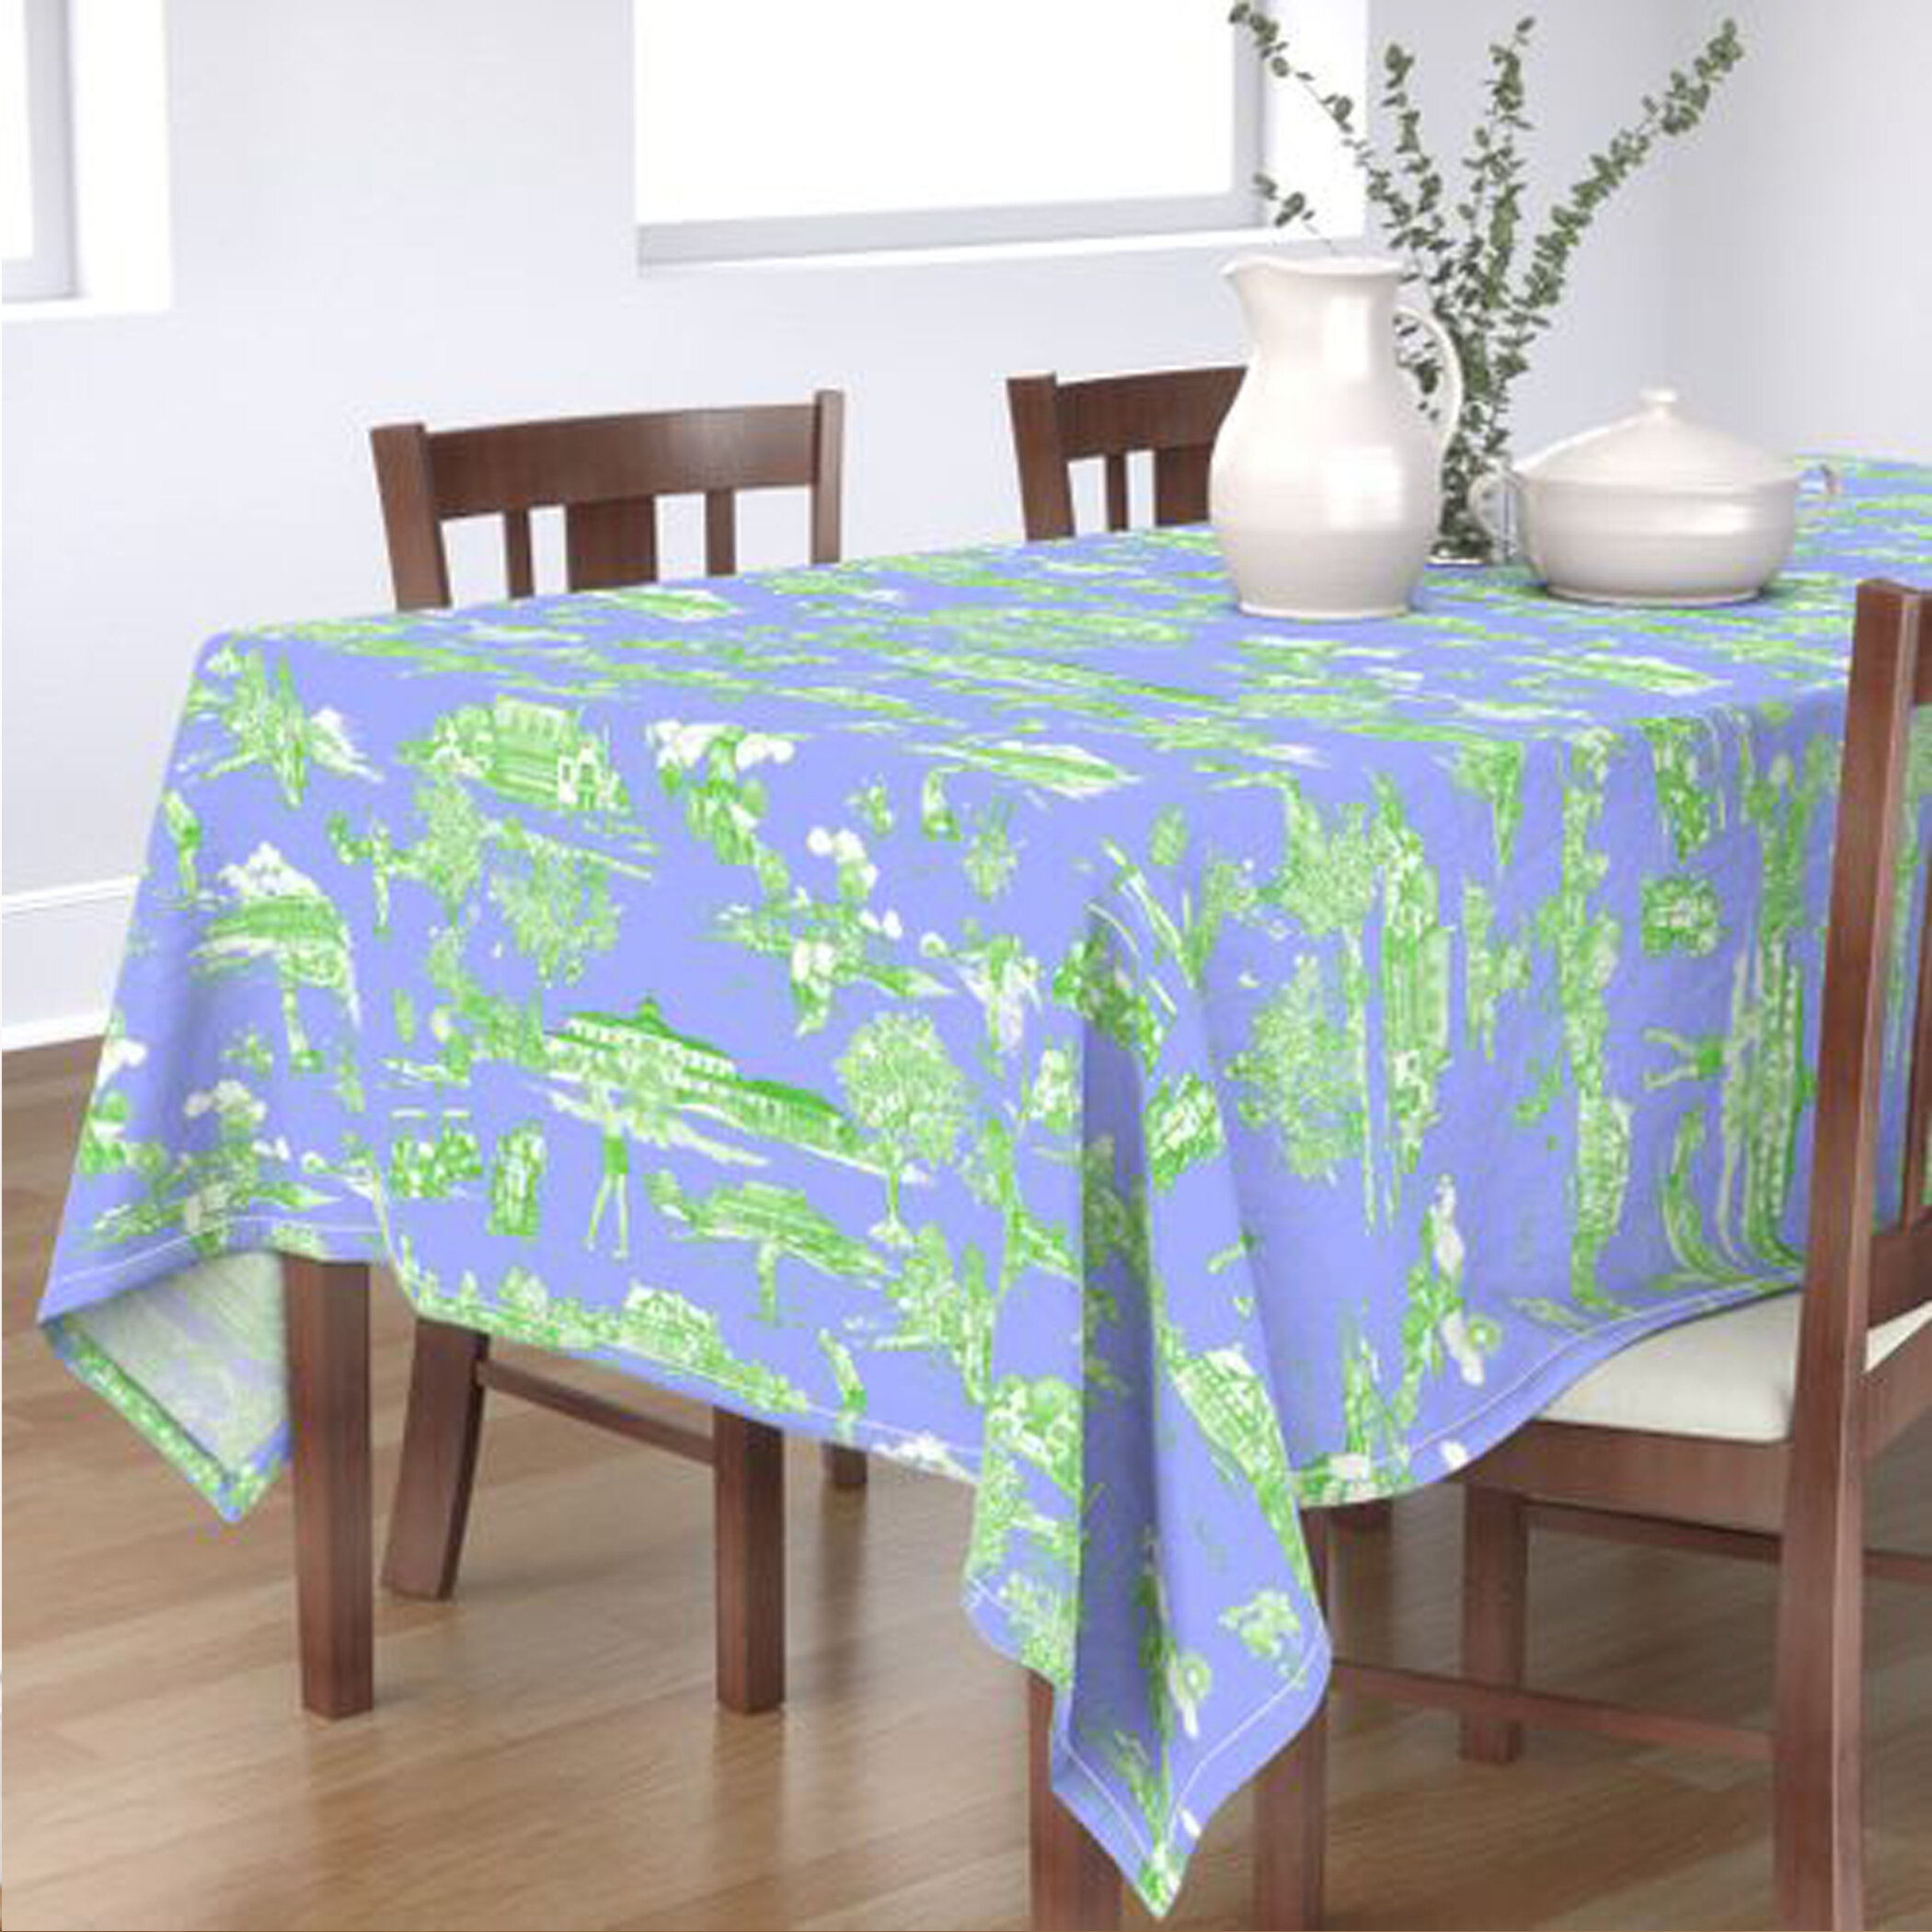 10.Periwinkle table cloth square.jpg